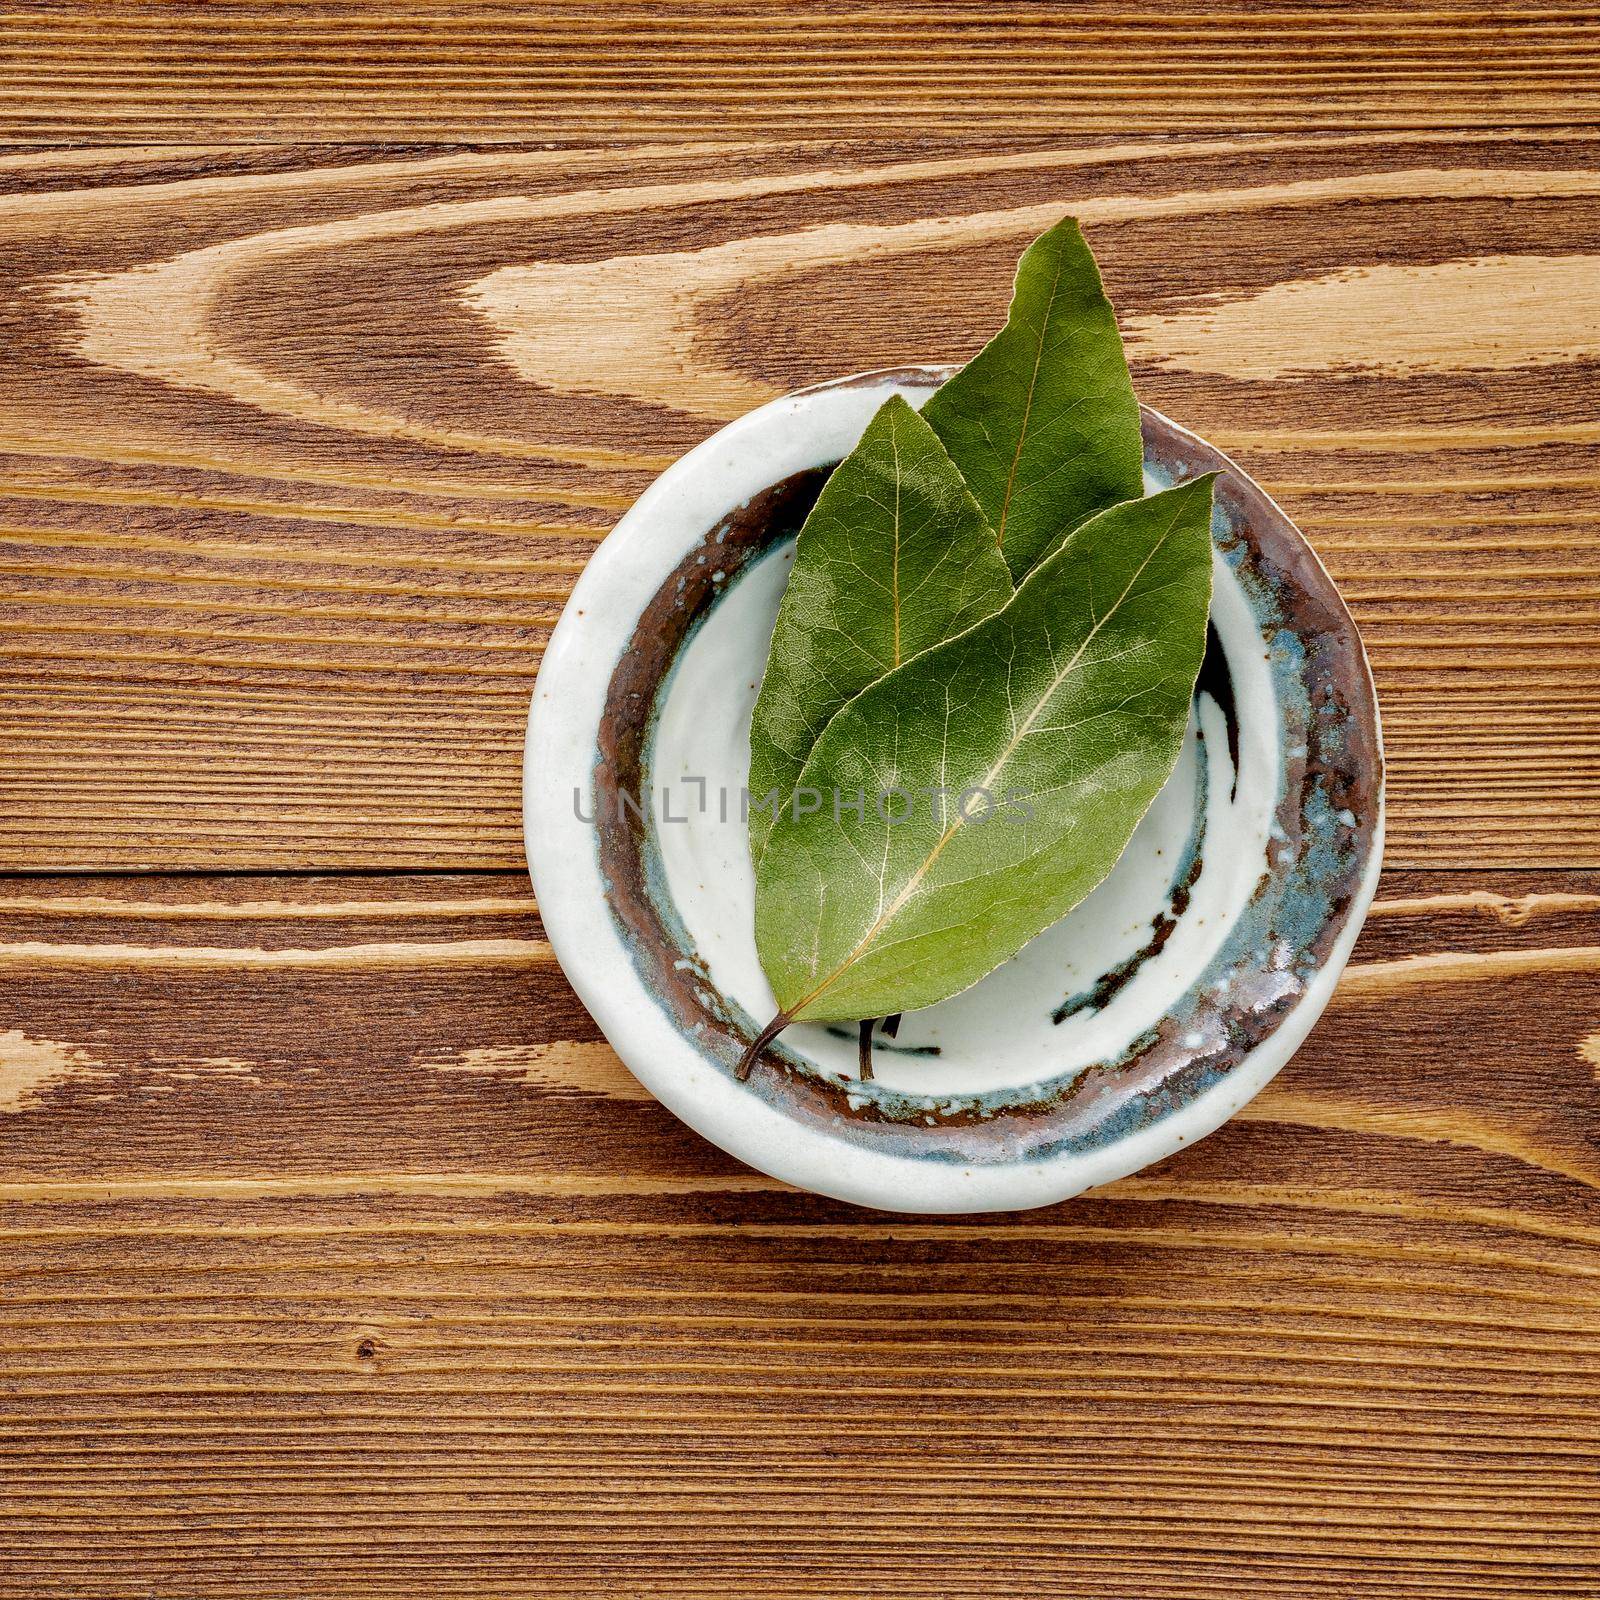 The bay leaves in ceramic bowl on shabby wooden background with copy space .